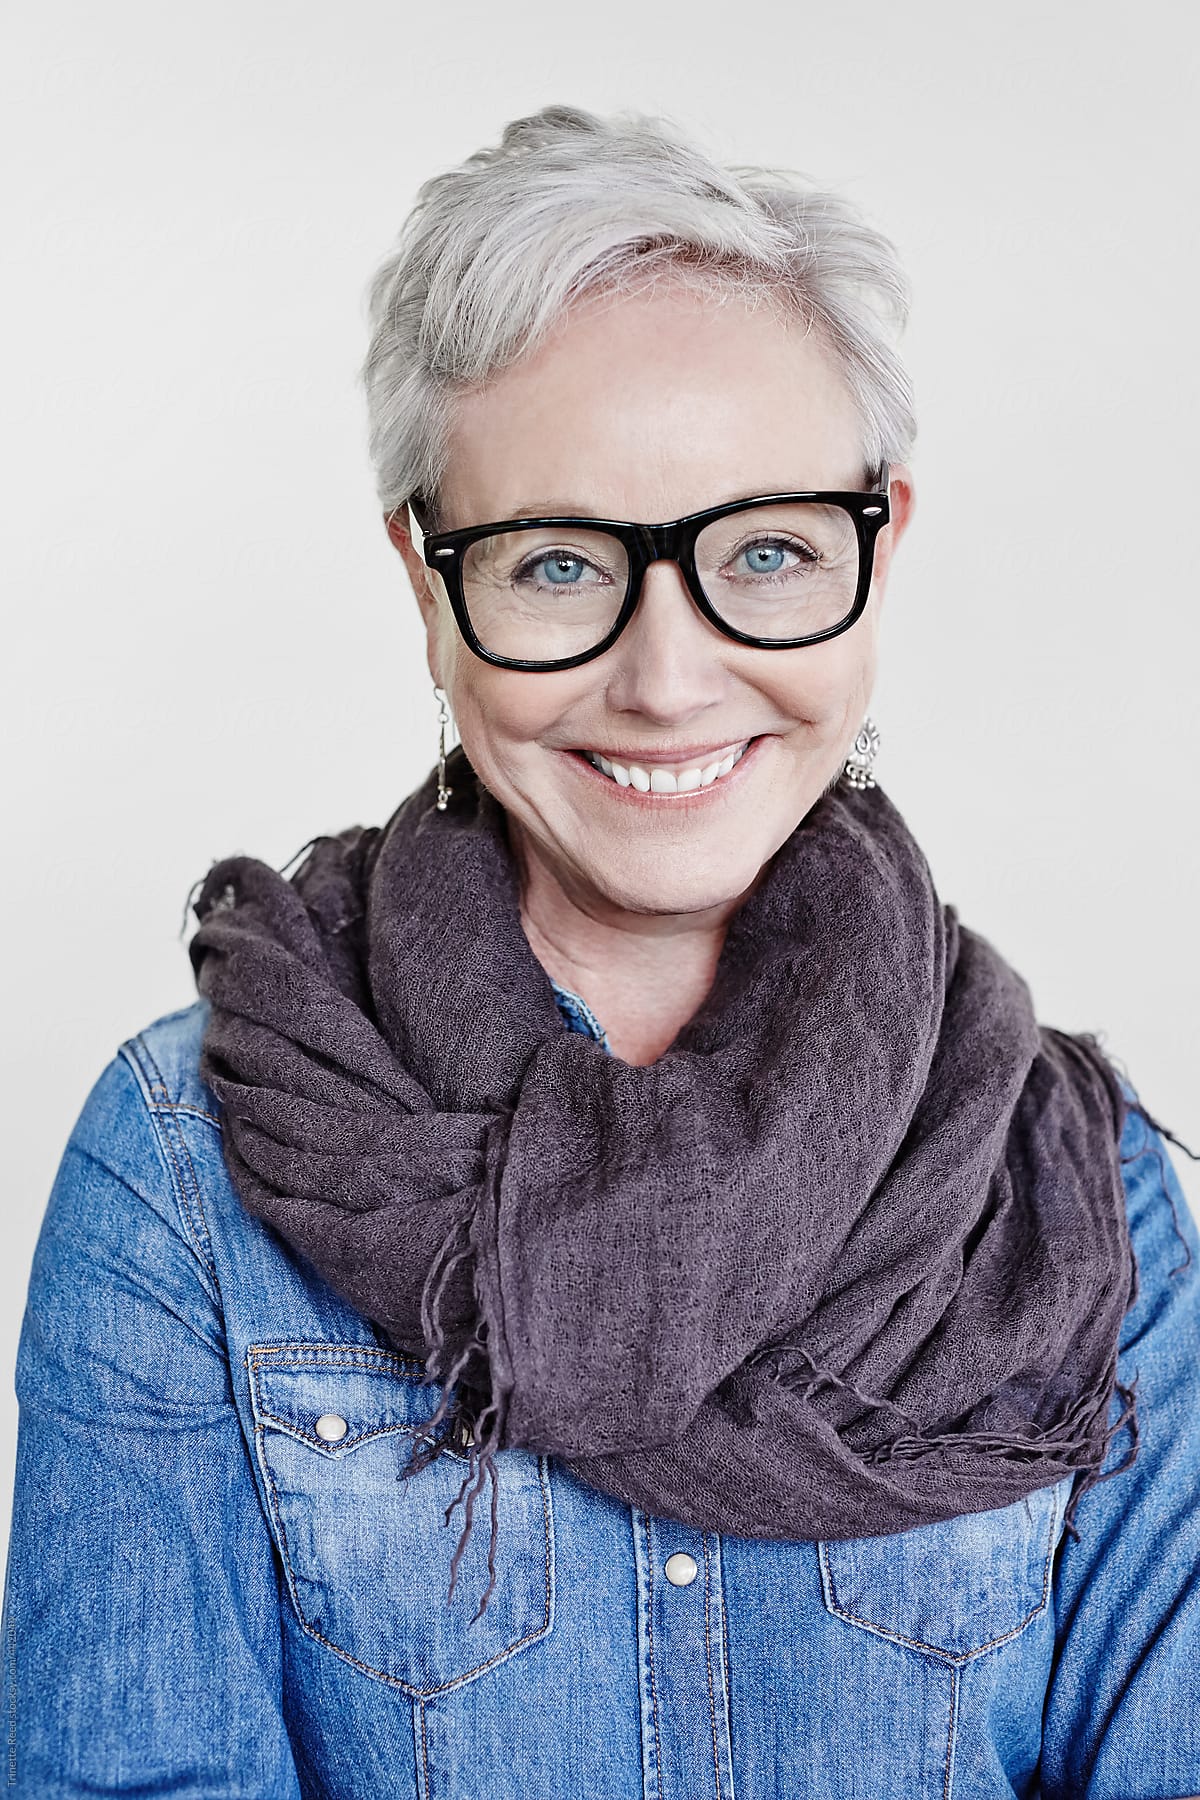 Studio portrait of happy mature woman with grey hair